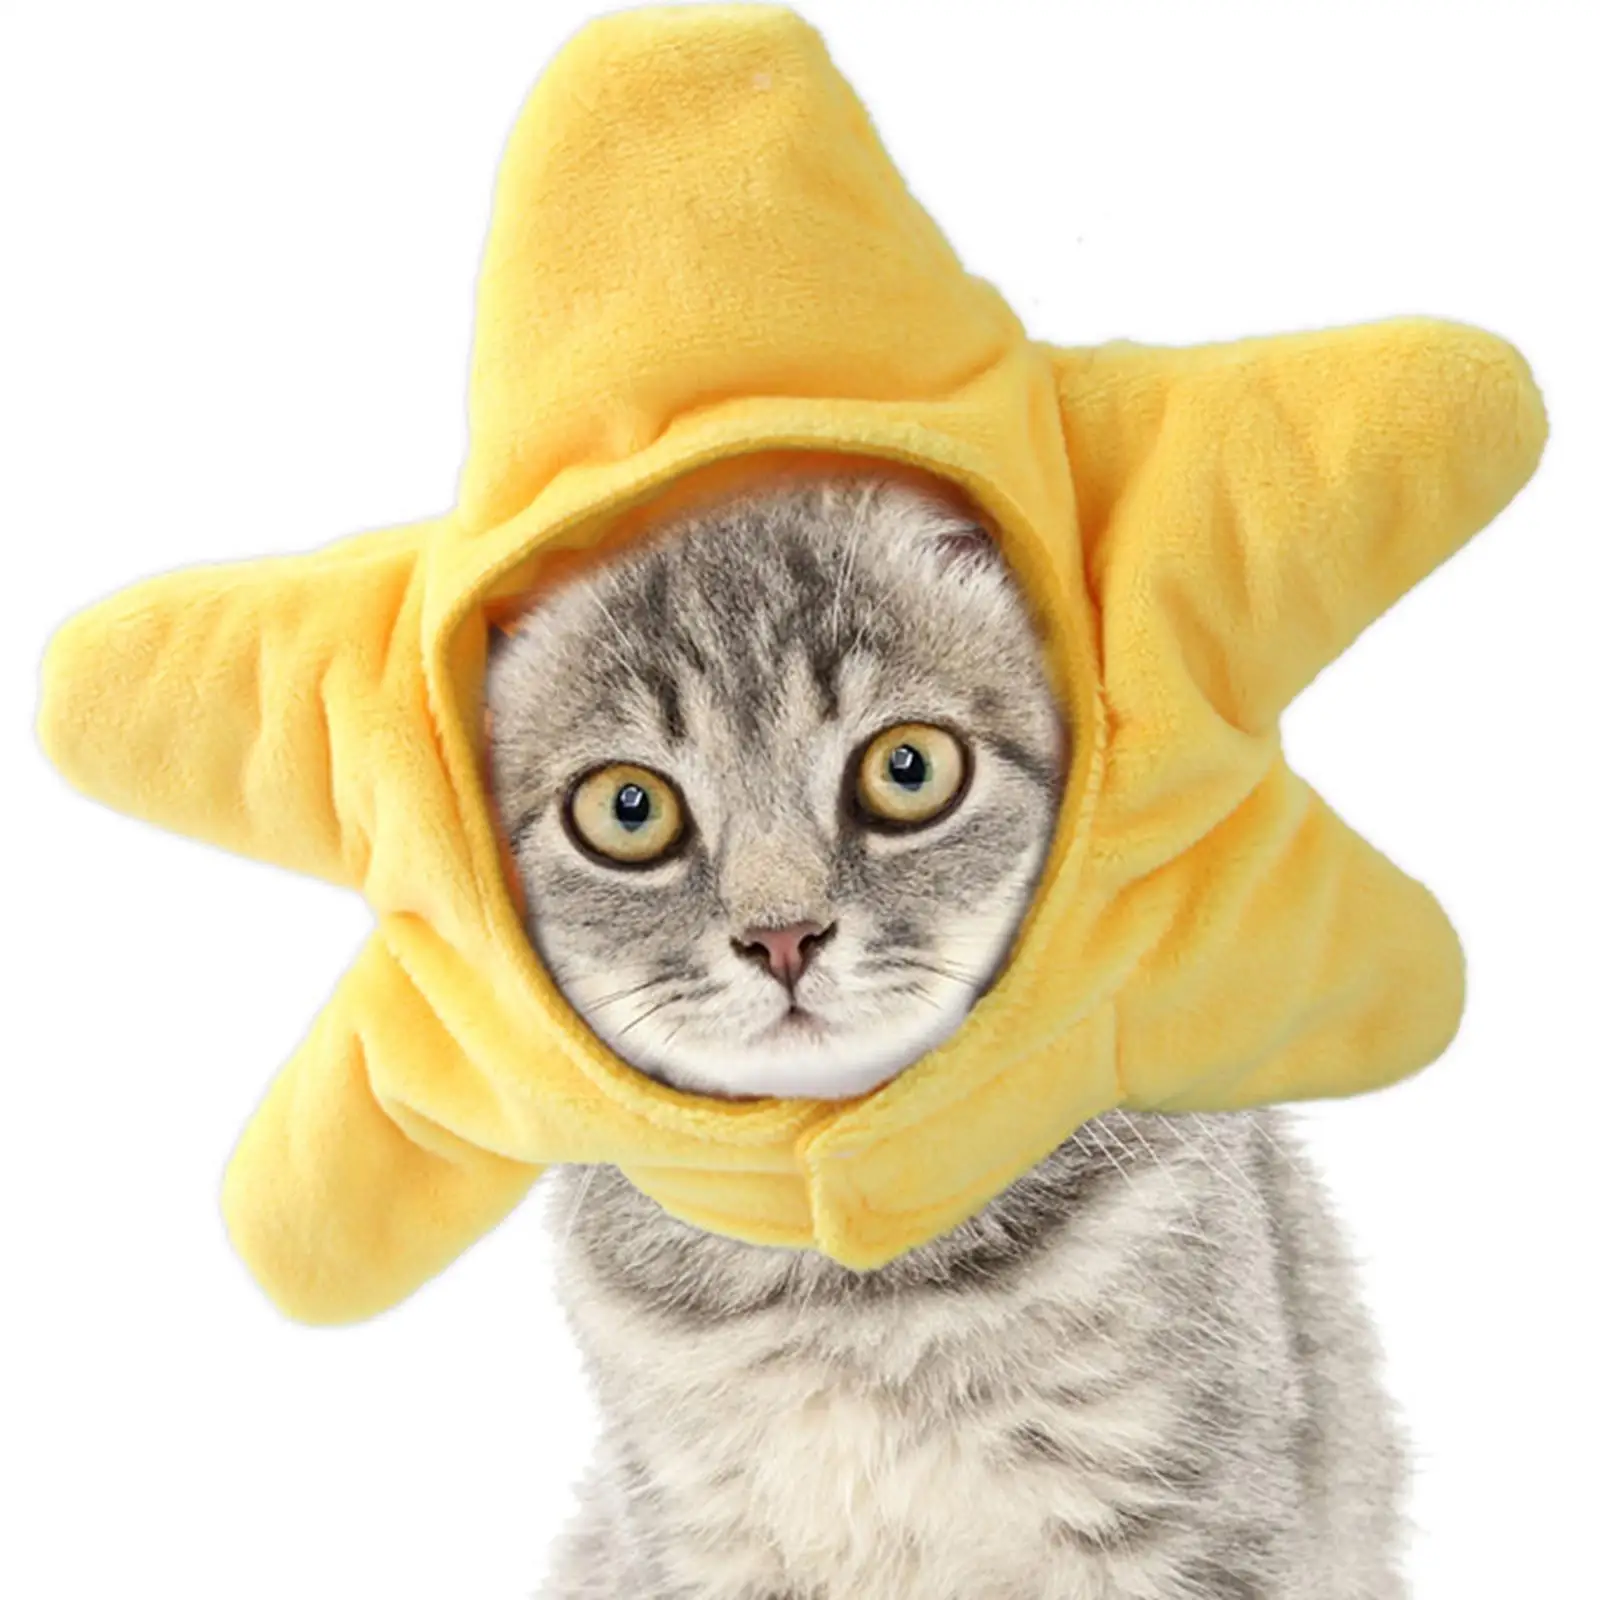 Cat Hat Yellow Star Soft Plush Adorable for Rabbit Birthday Costume Accessory Dress up